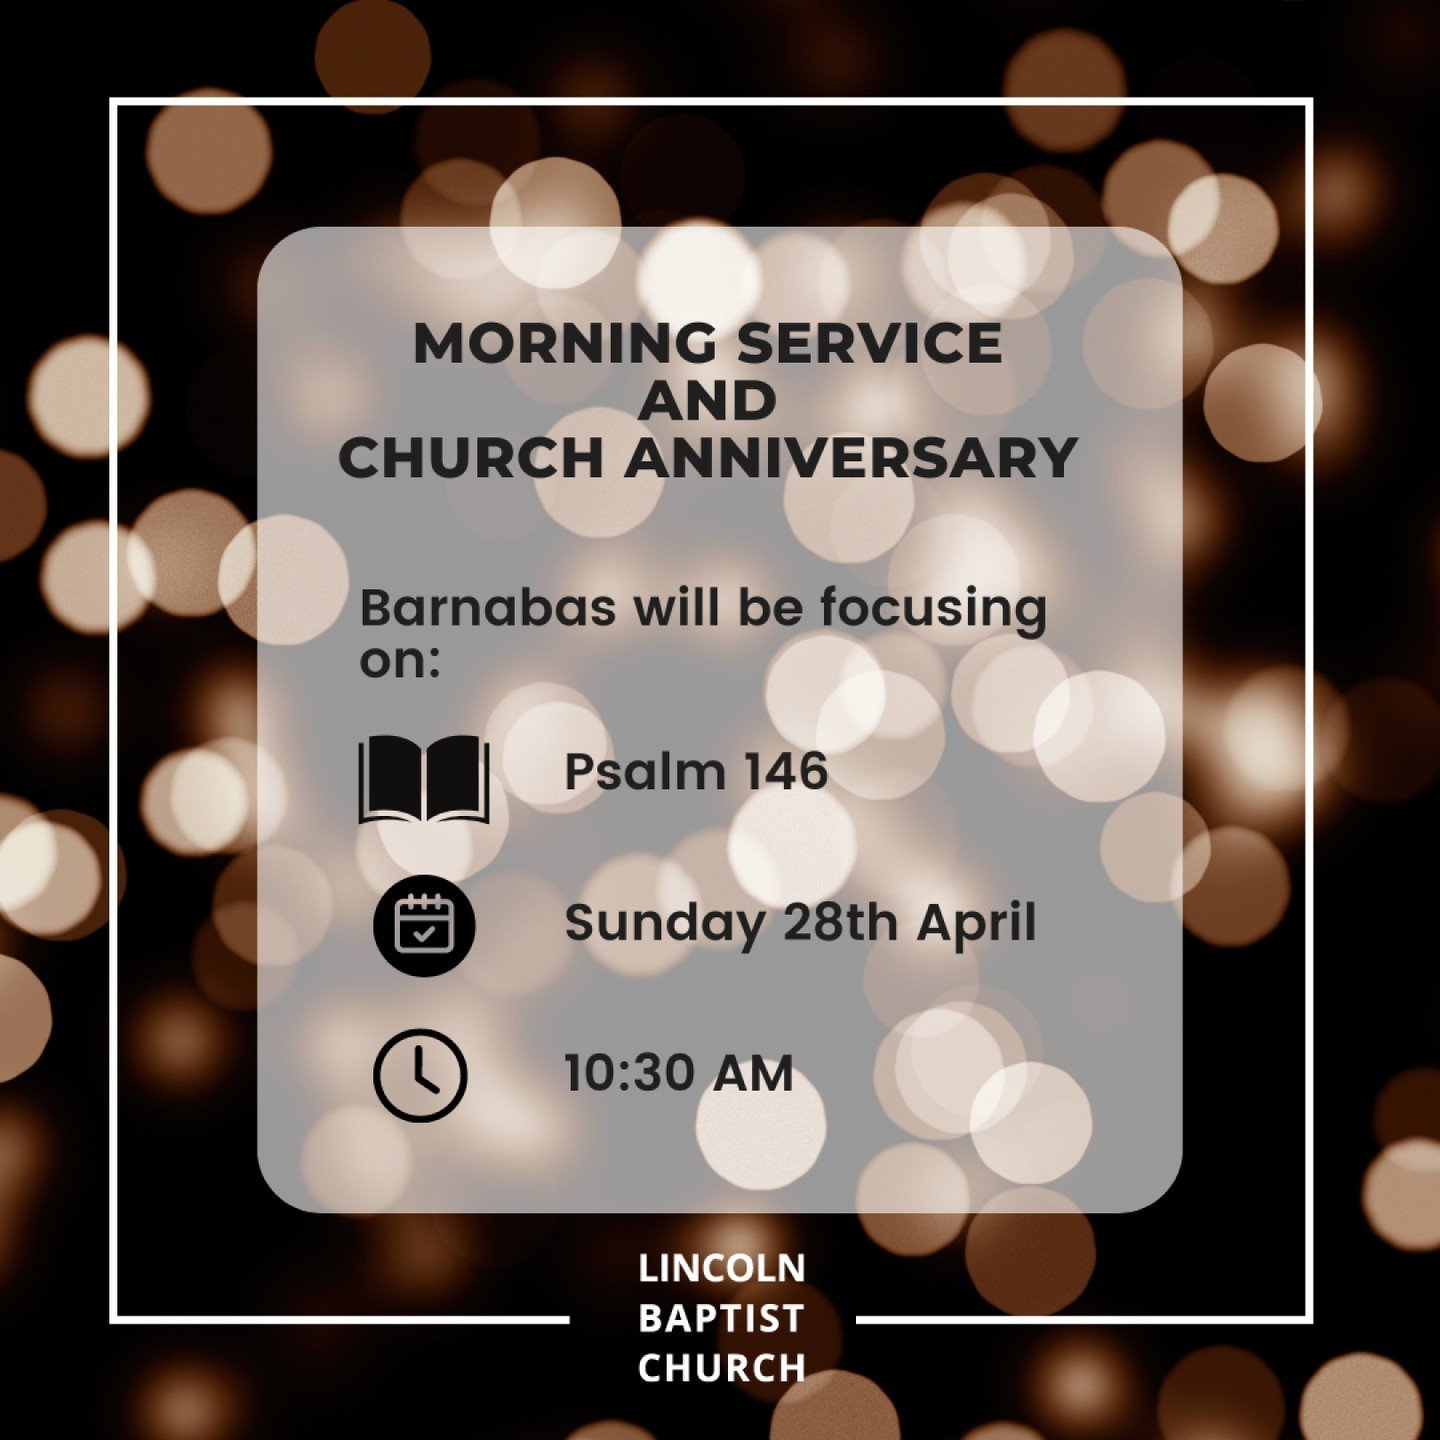 Please join us this Sunday at Lincoln Baptist Church  from 10:00 am for refreshments and fellowship before the service starts at 10:30am where  Barnabas will be focusing on Psalm 146.

We will also be celebrating our Church's Anniversary.

We look fo